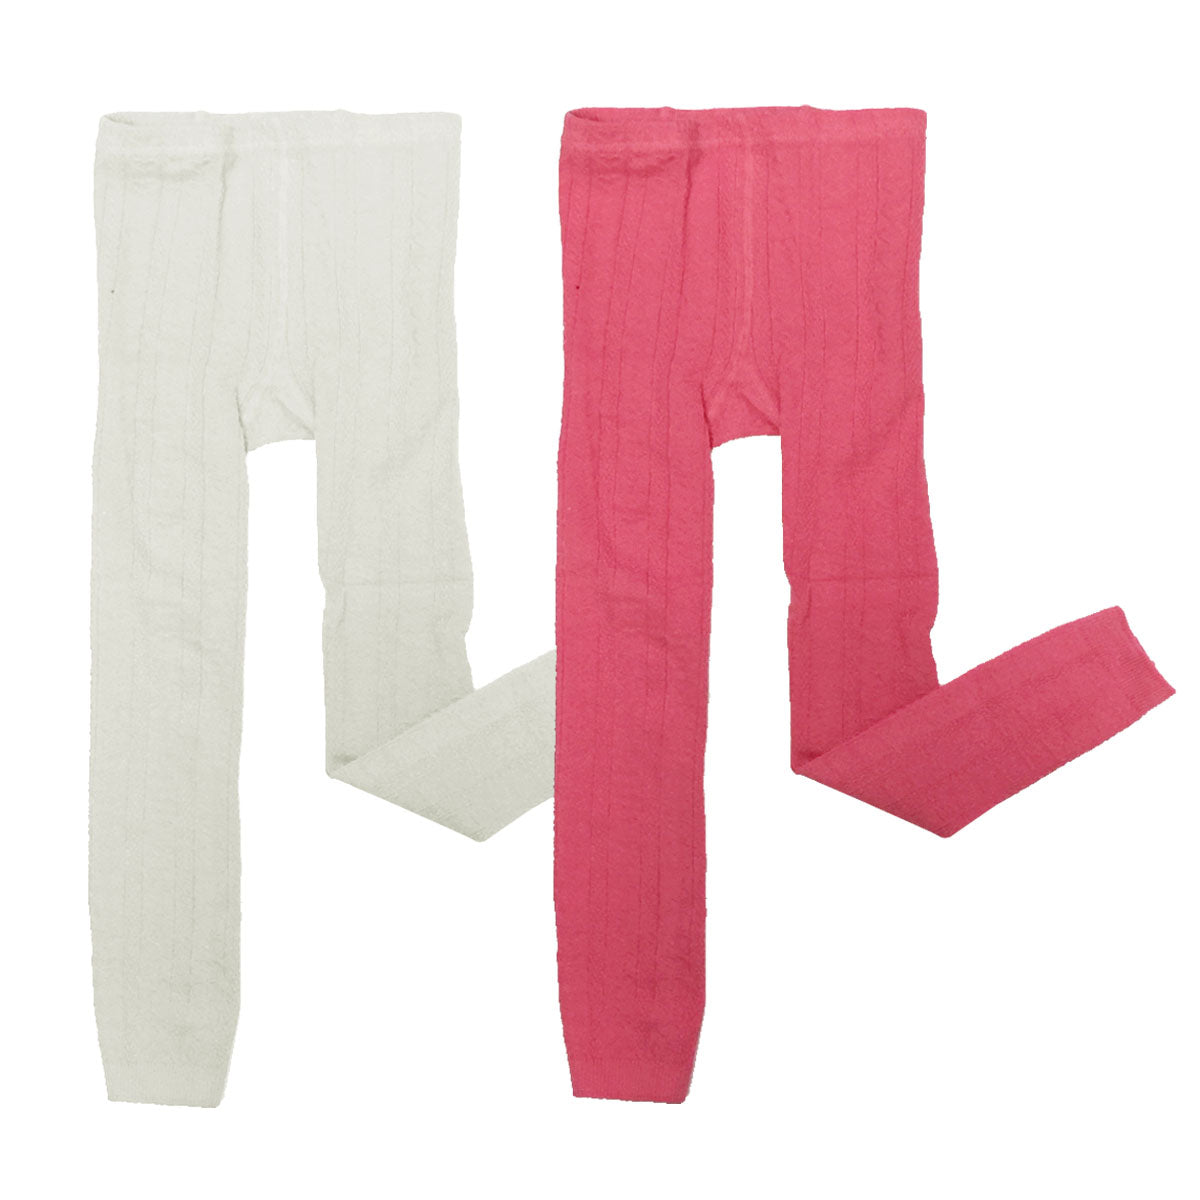 Wrapables White and Pink Cotton Heart Knit Tights for Leggings (Set of 2)